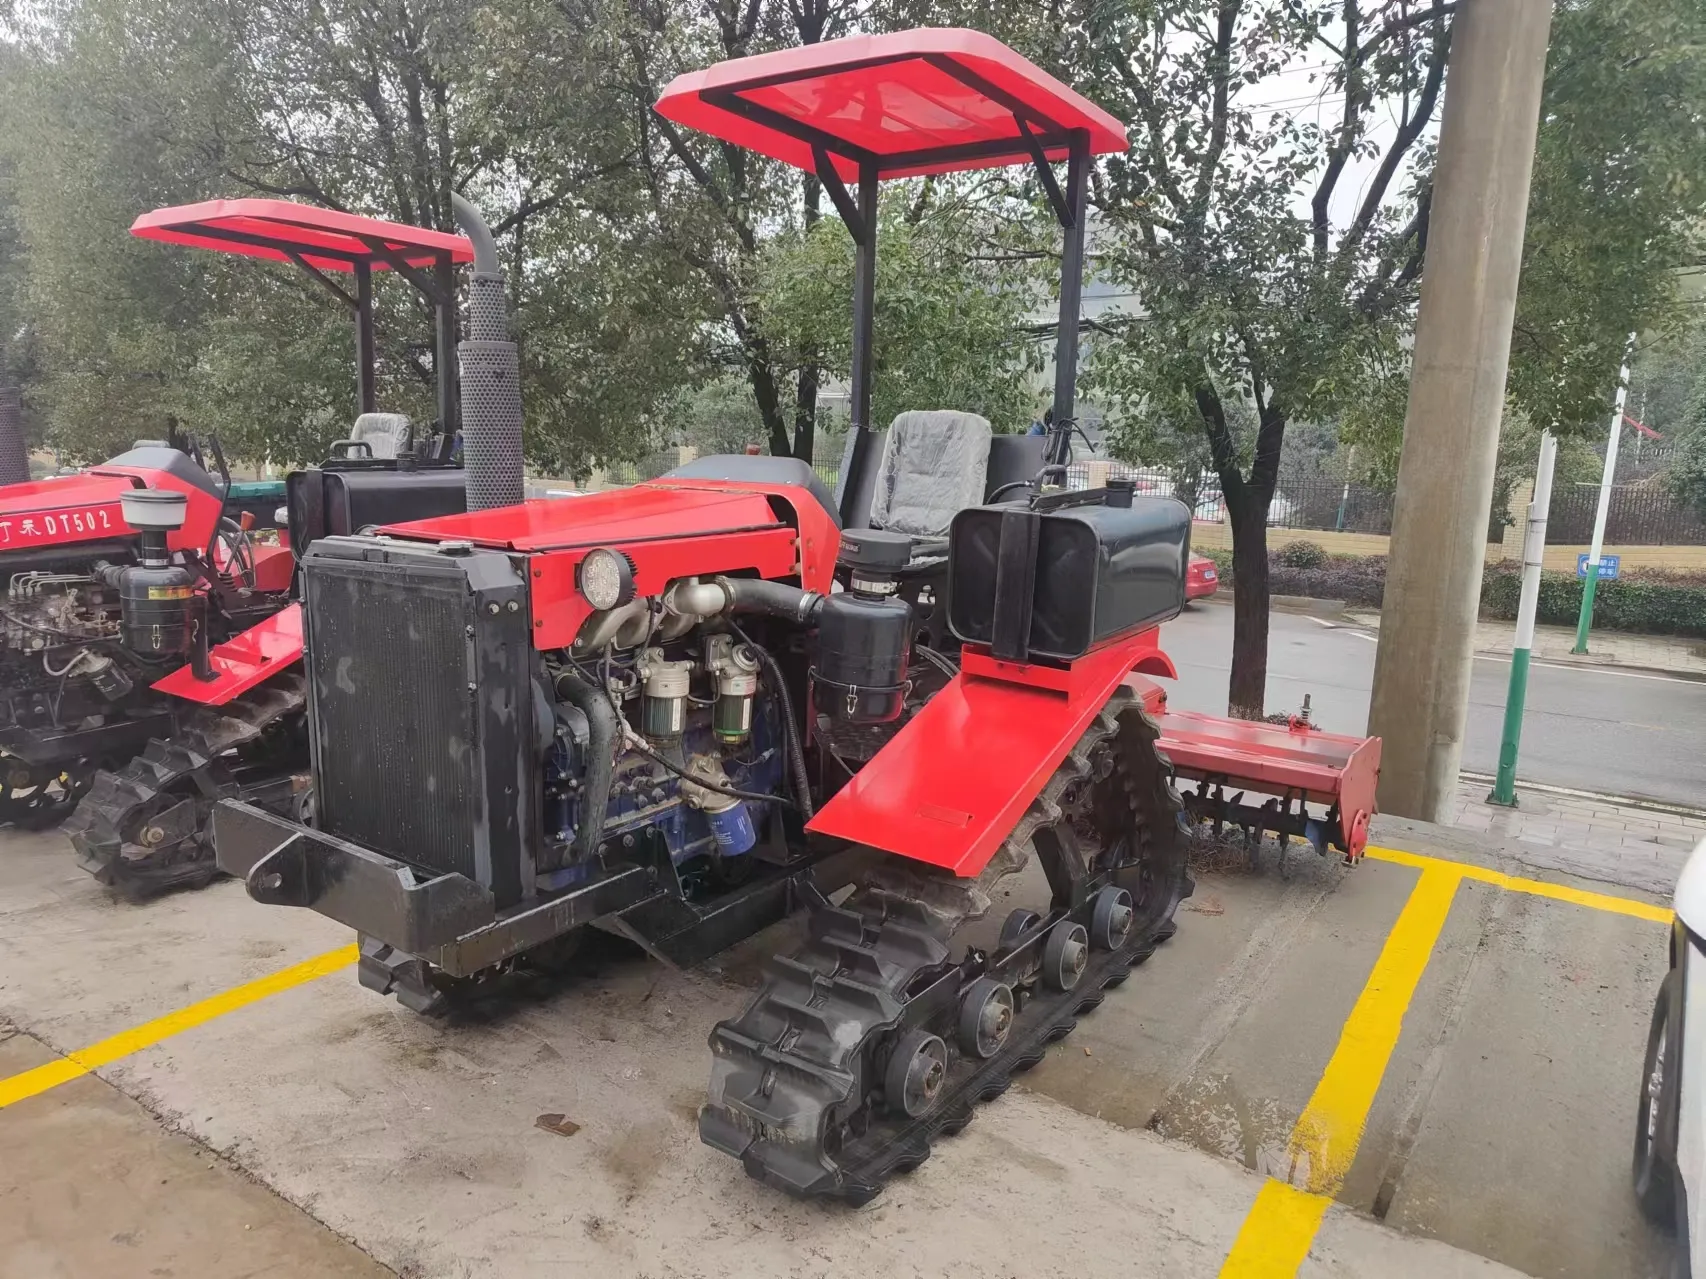 High quality and efficient operation of deep mud tractors